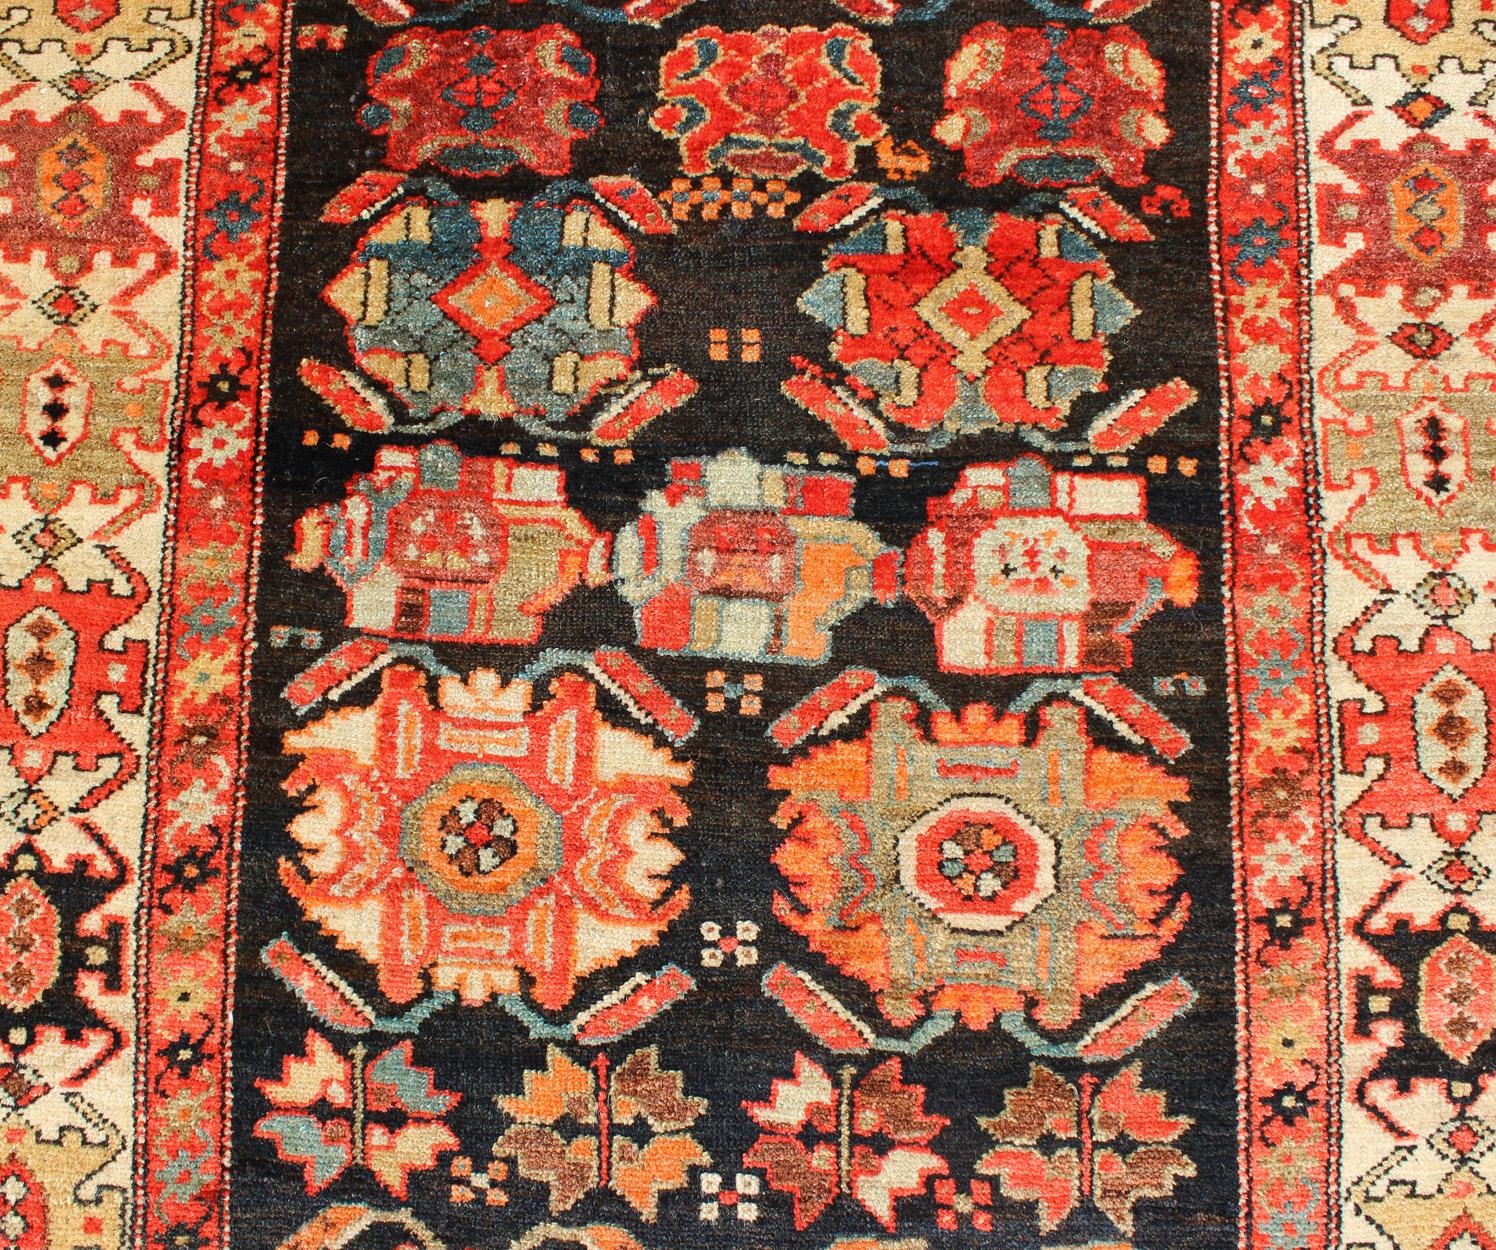 Sub-Geometric Antique Persian Malayer Runner in Onyx and Orange Tones In Excellent Condition For Sale In Atlanta, GA